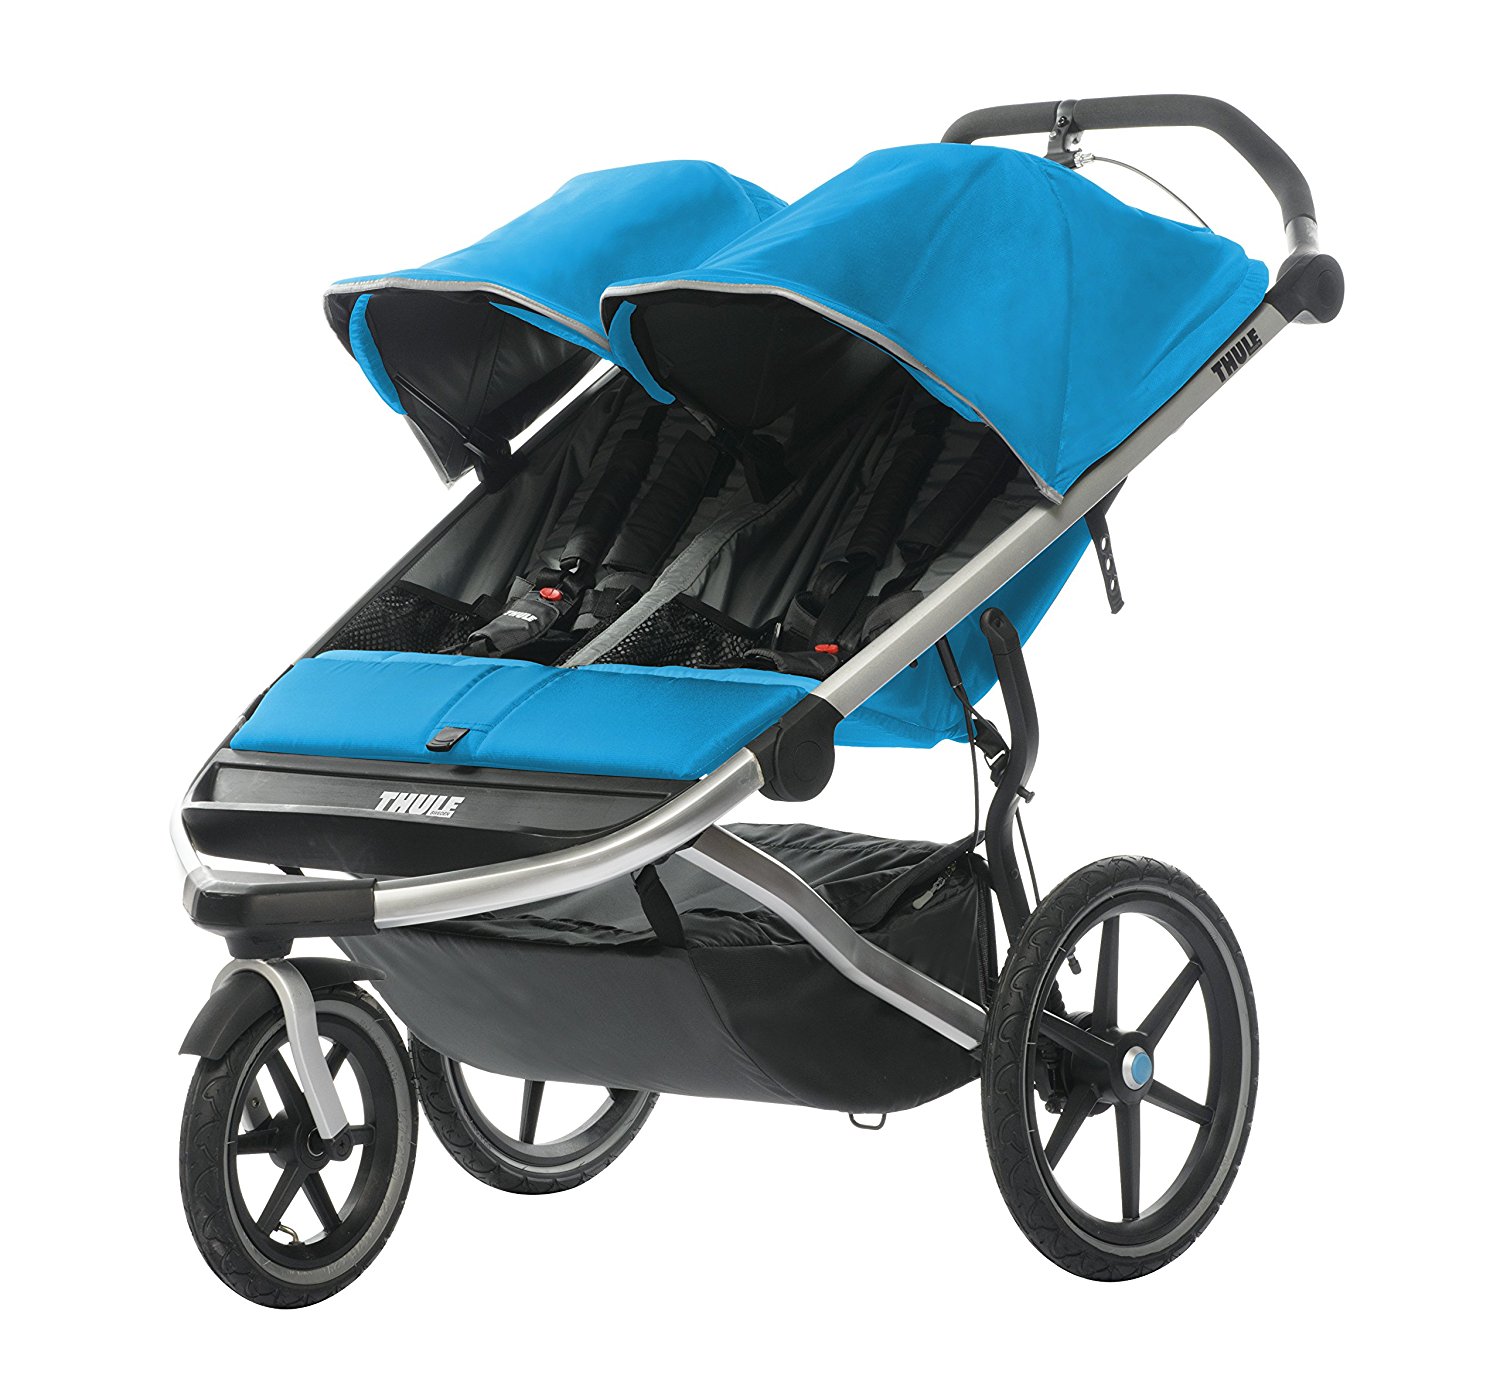 Baby Equipment Rental Company Directory Baby Can Travel